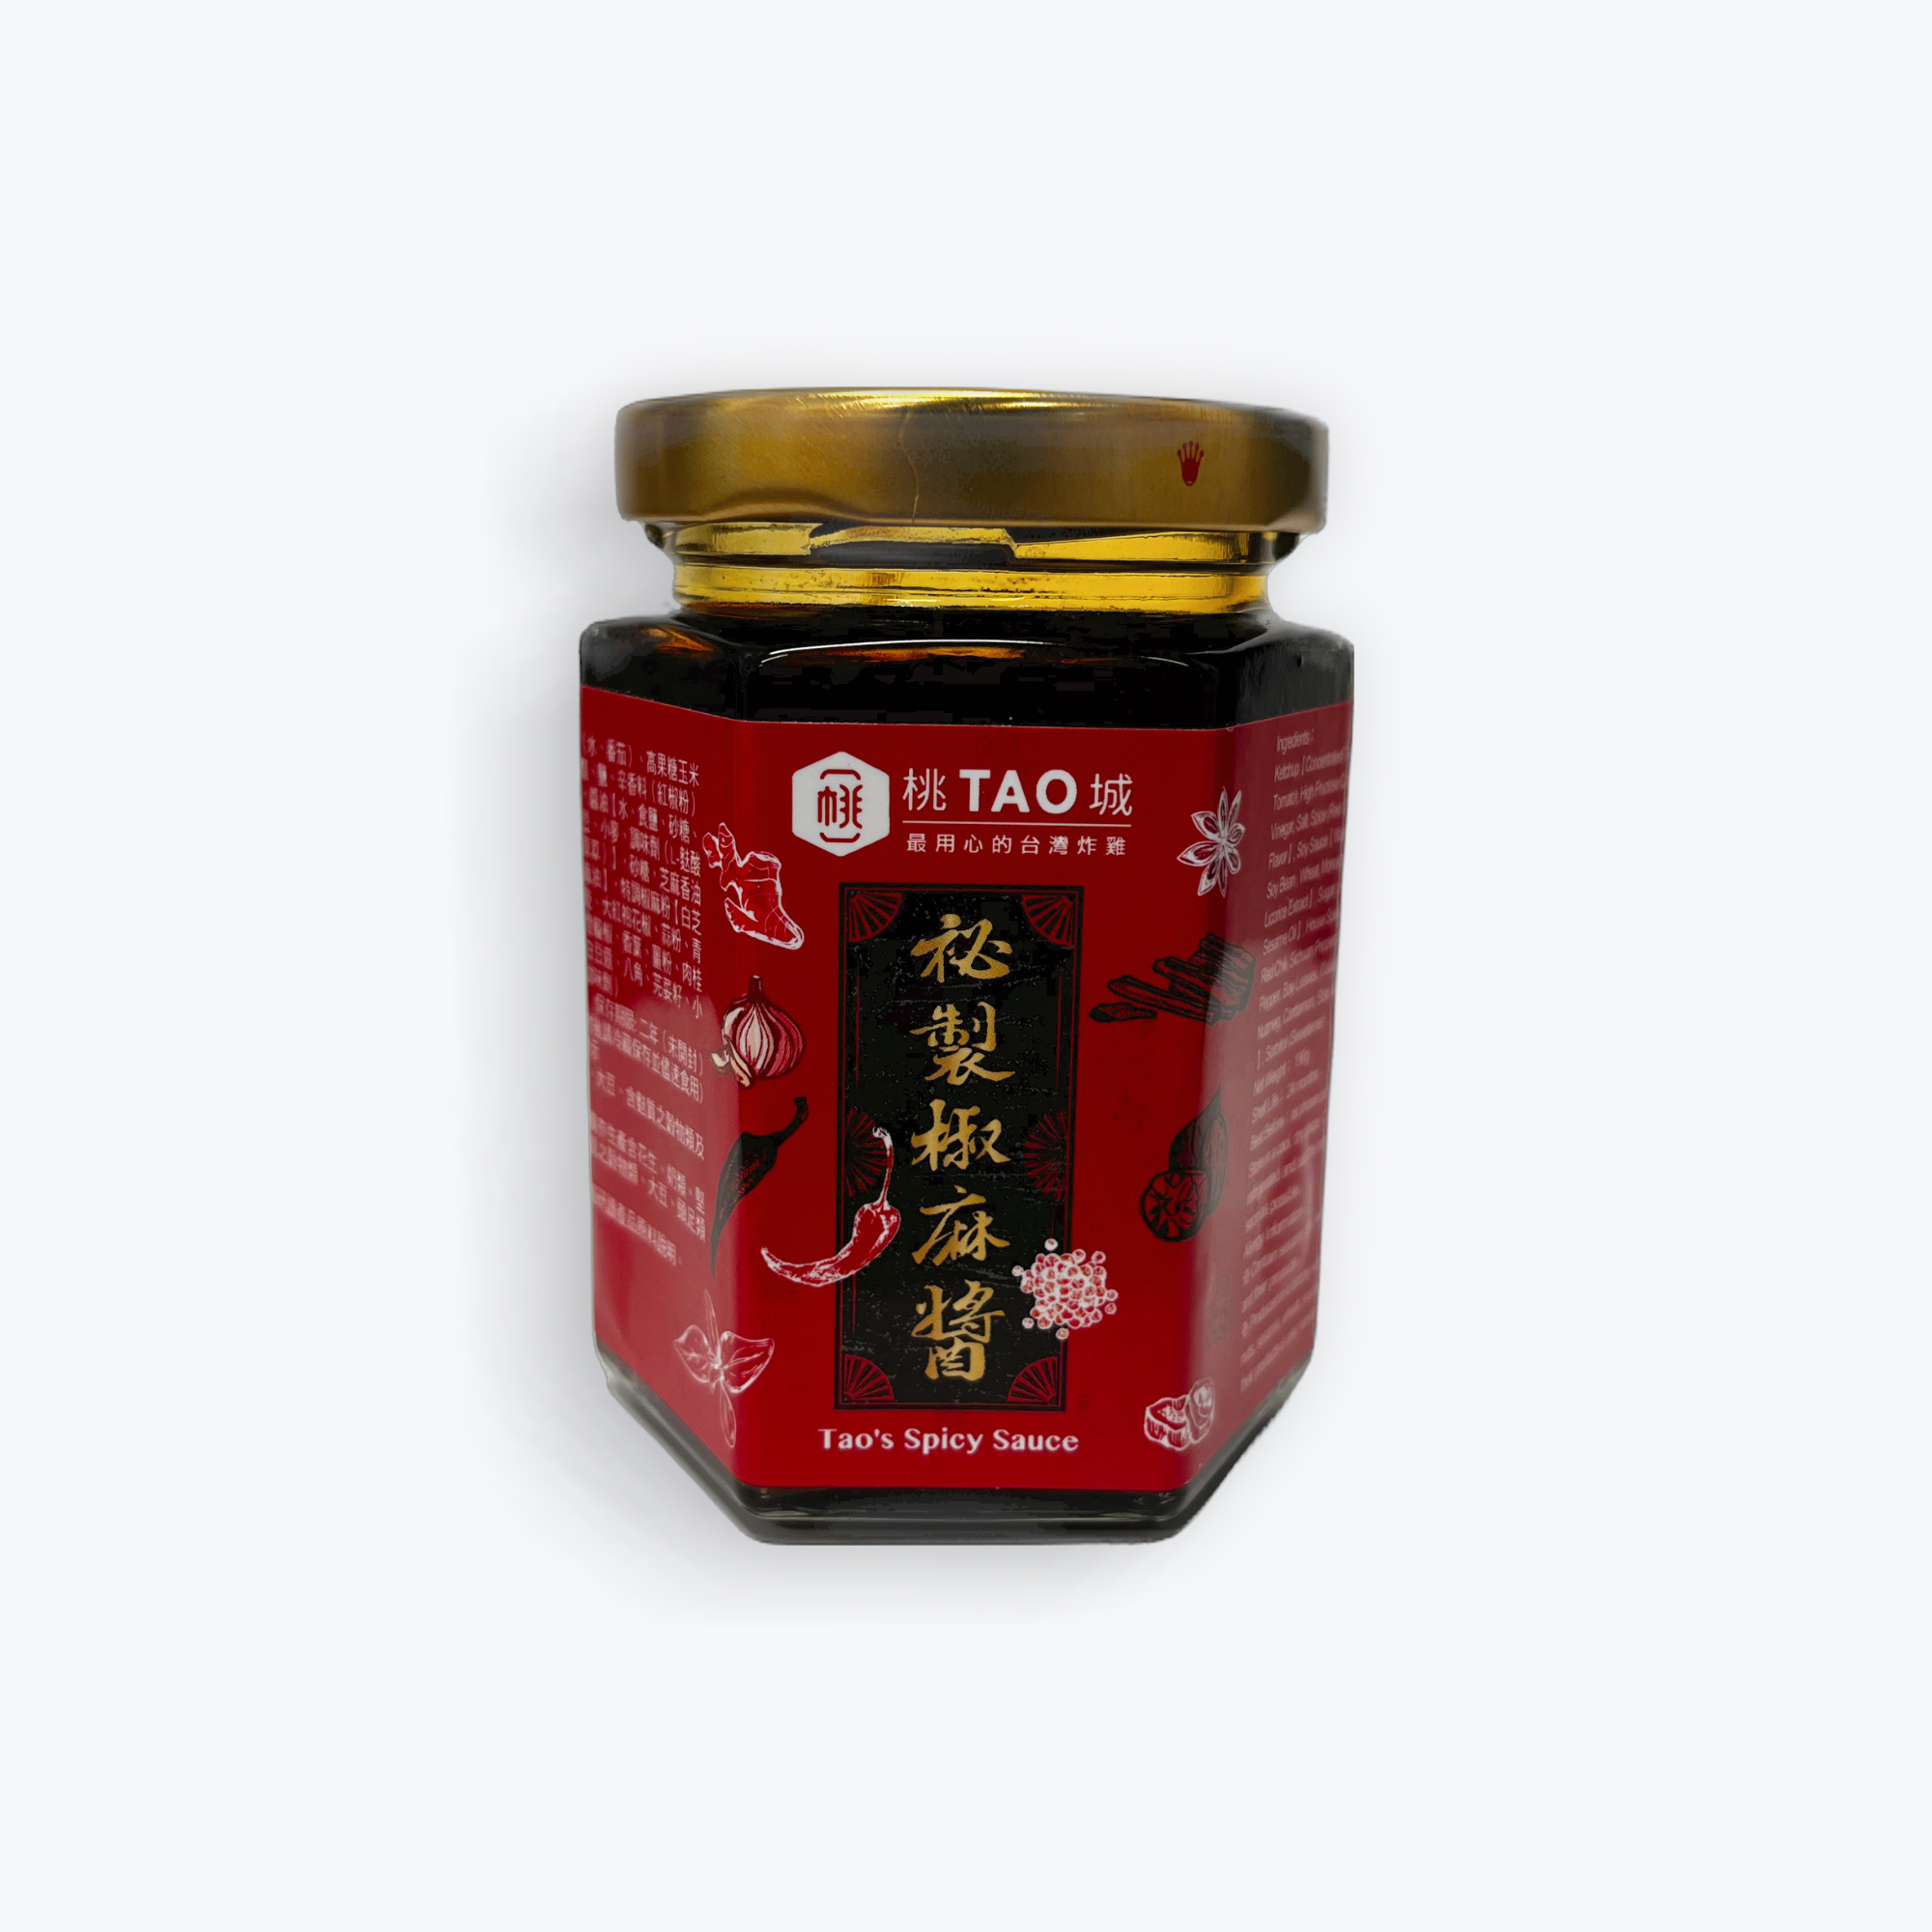 Tao's Spicy Sauce by Tao Chicken | Hyphen Asian Food and Culture